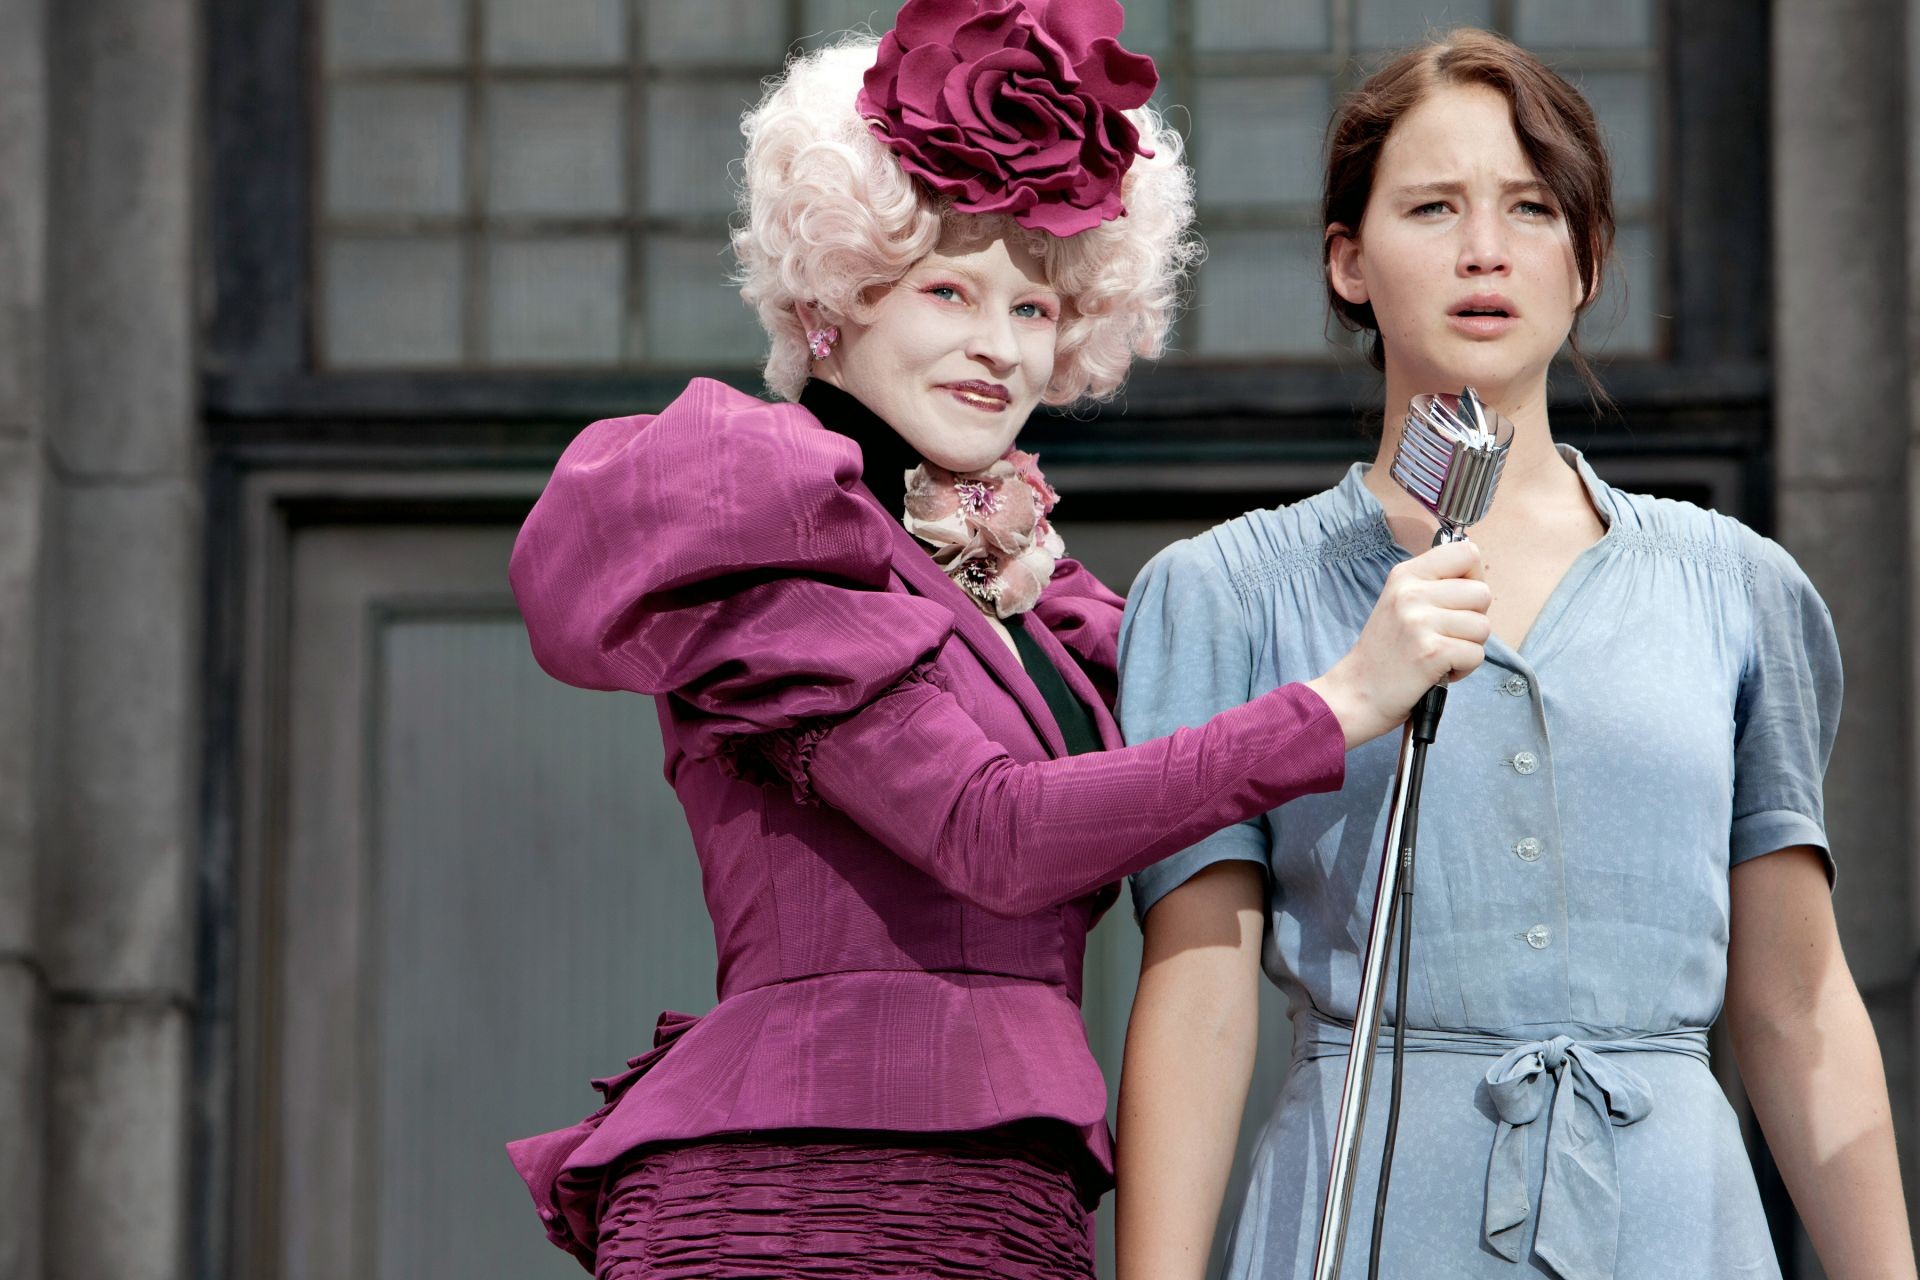 Elizabeth Banks stars as Effie Trinket and Jennifer Lawrence stars as Katniss Everdeen in Lionsgate Films' The Hunger Games (2012). Photo credit by Murray Close.